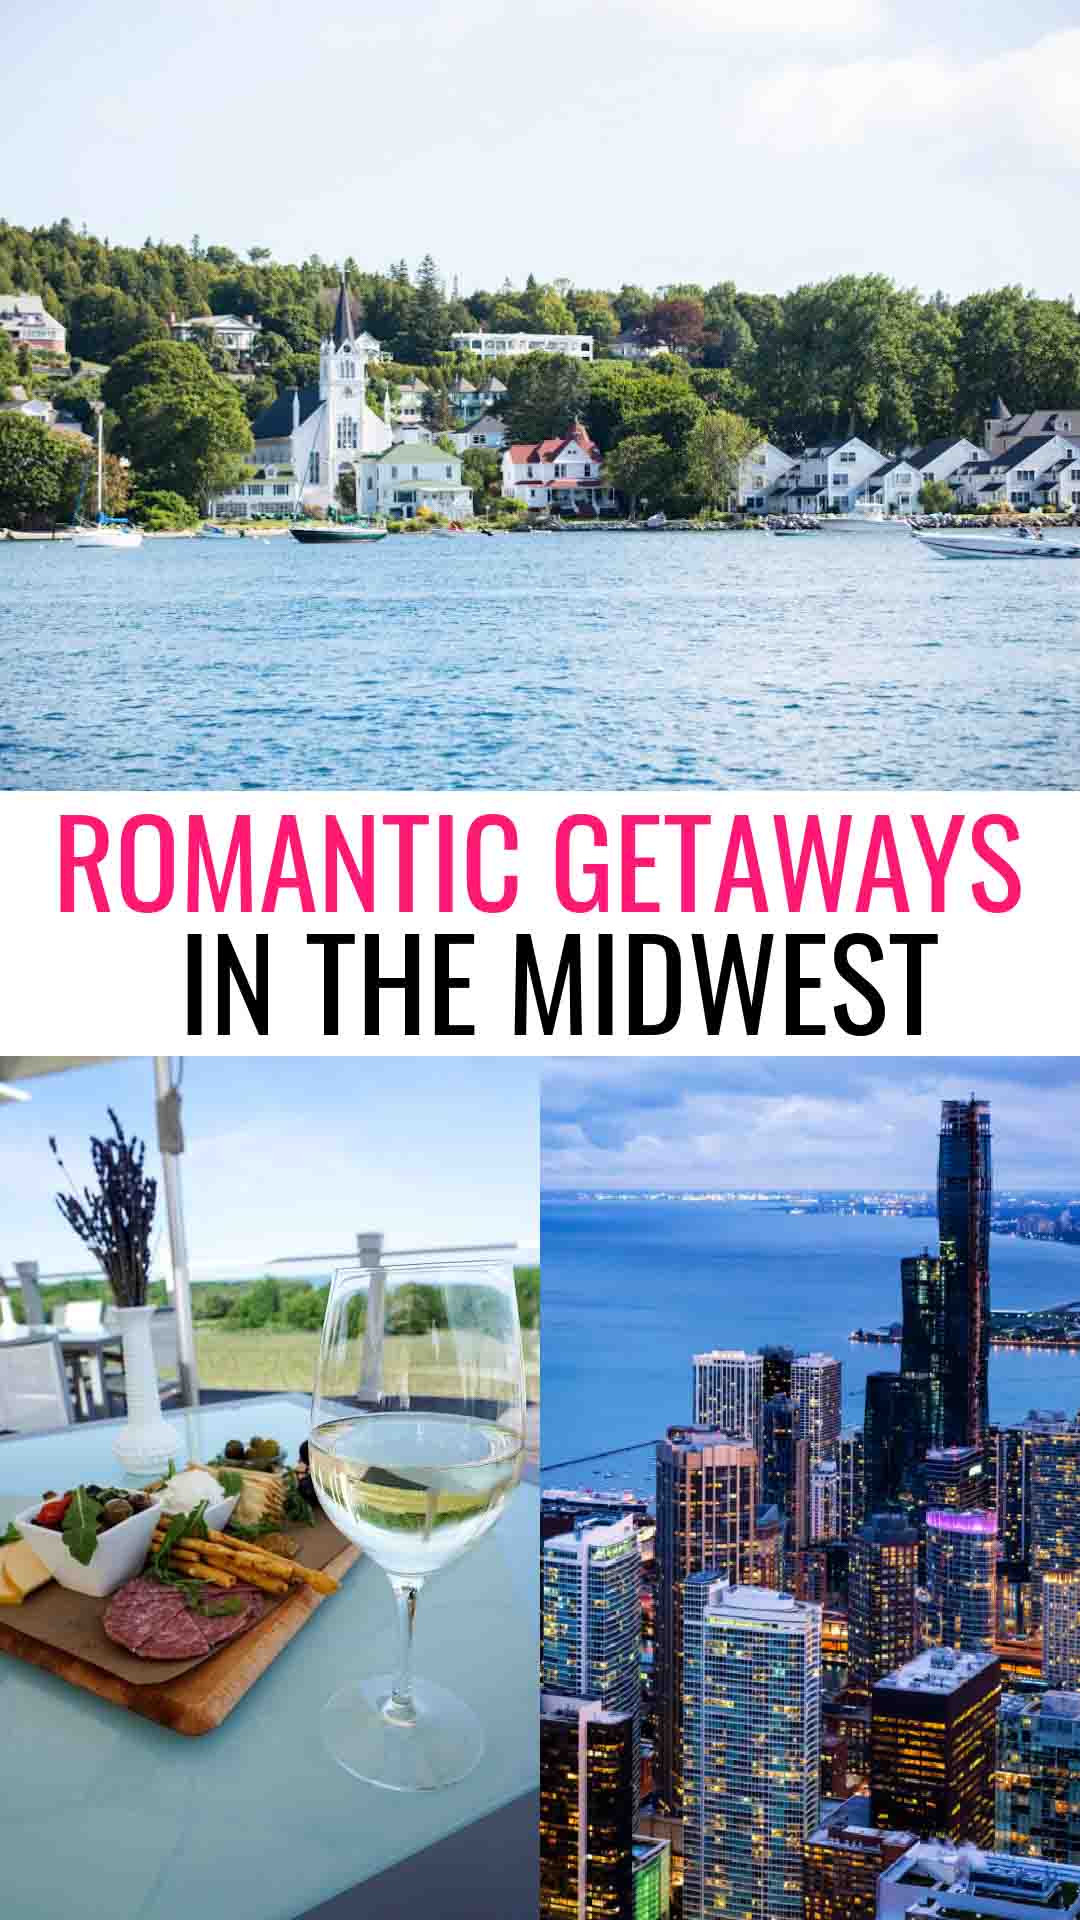 Romantic Getaways in the Midwest: Mackinac Island, Chicago, Traverse City wineries